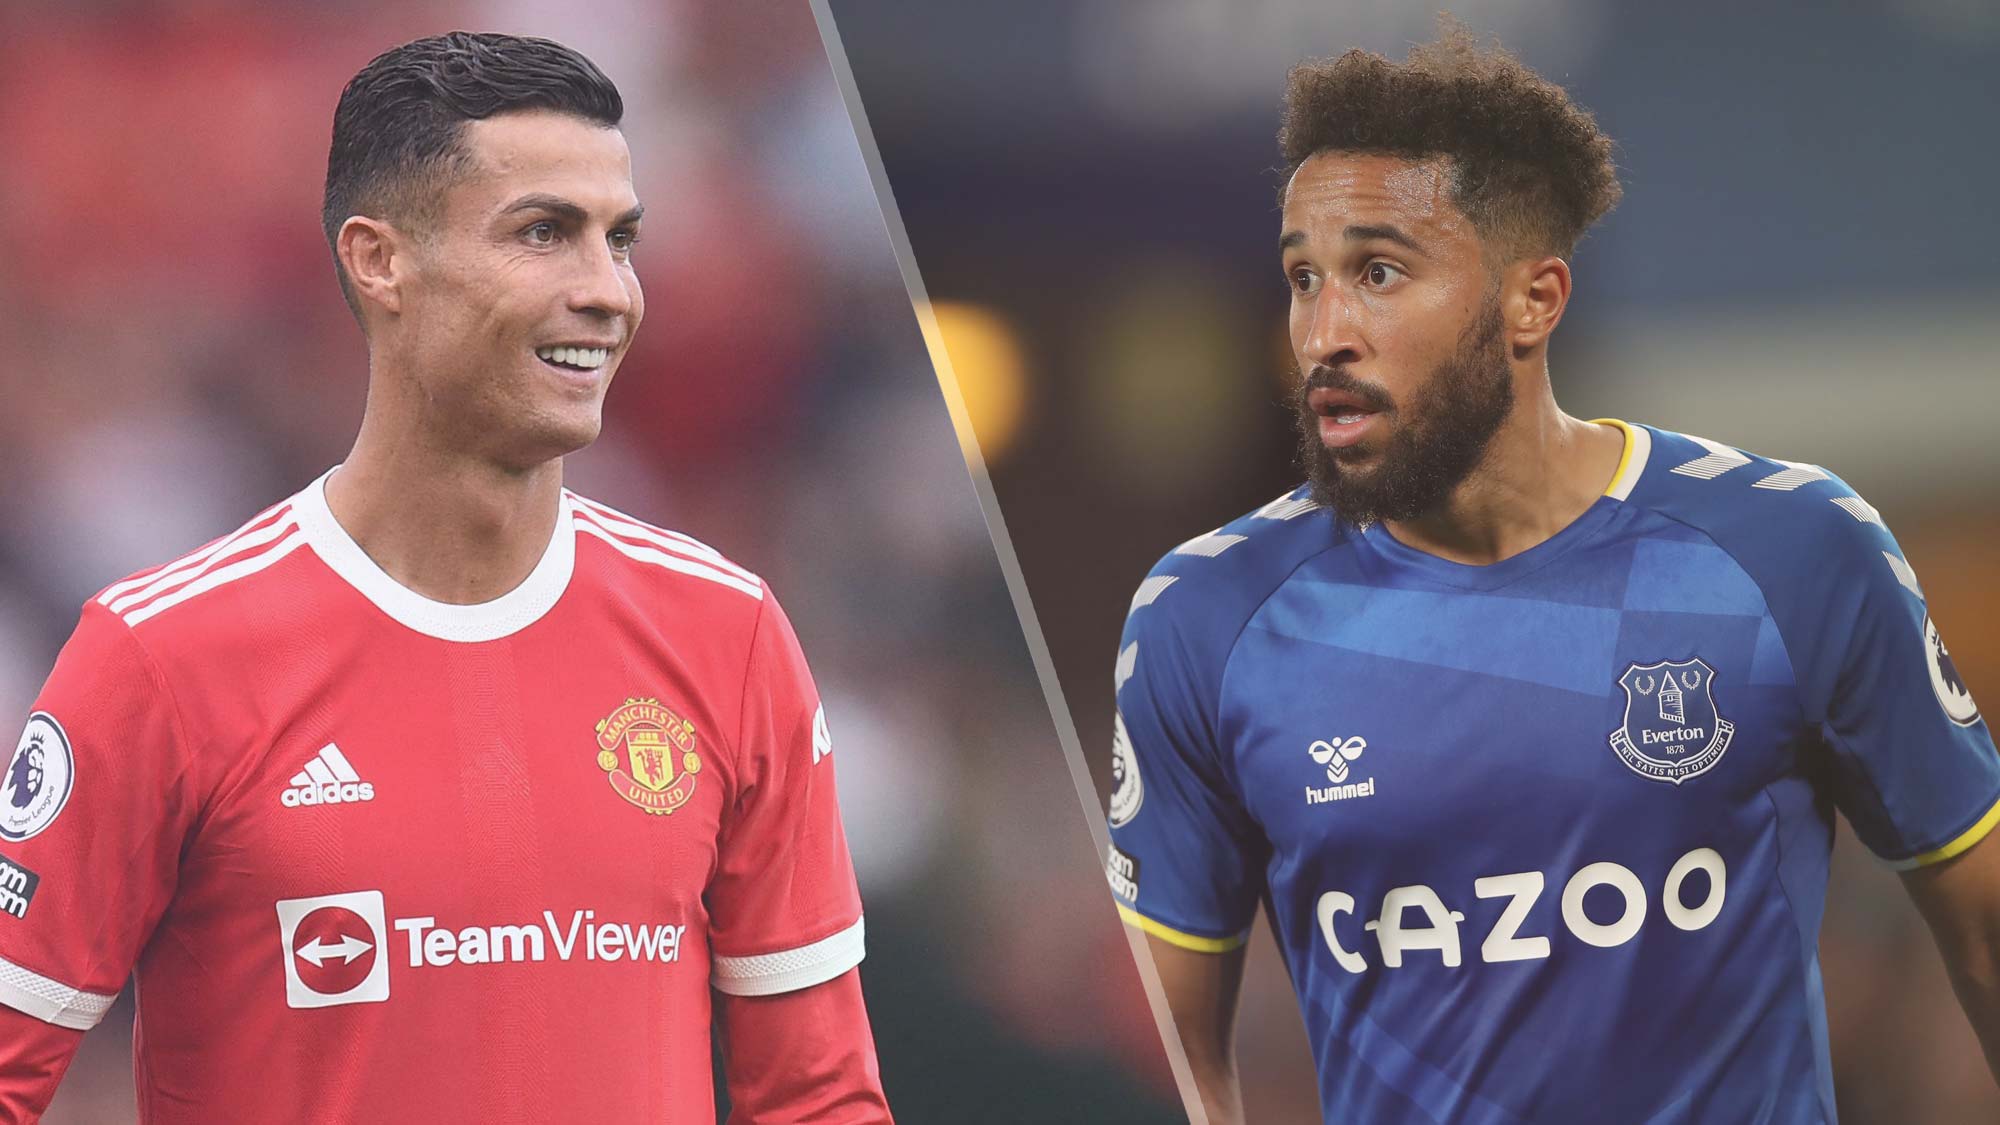 Manchester United vs Everton live stream and how to watch Premier League 21/22 game online | Tom's Guide